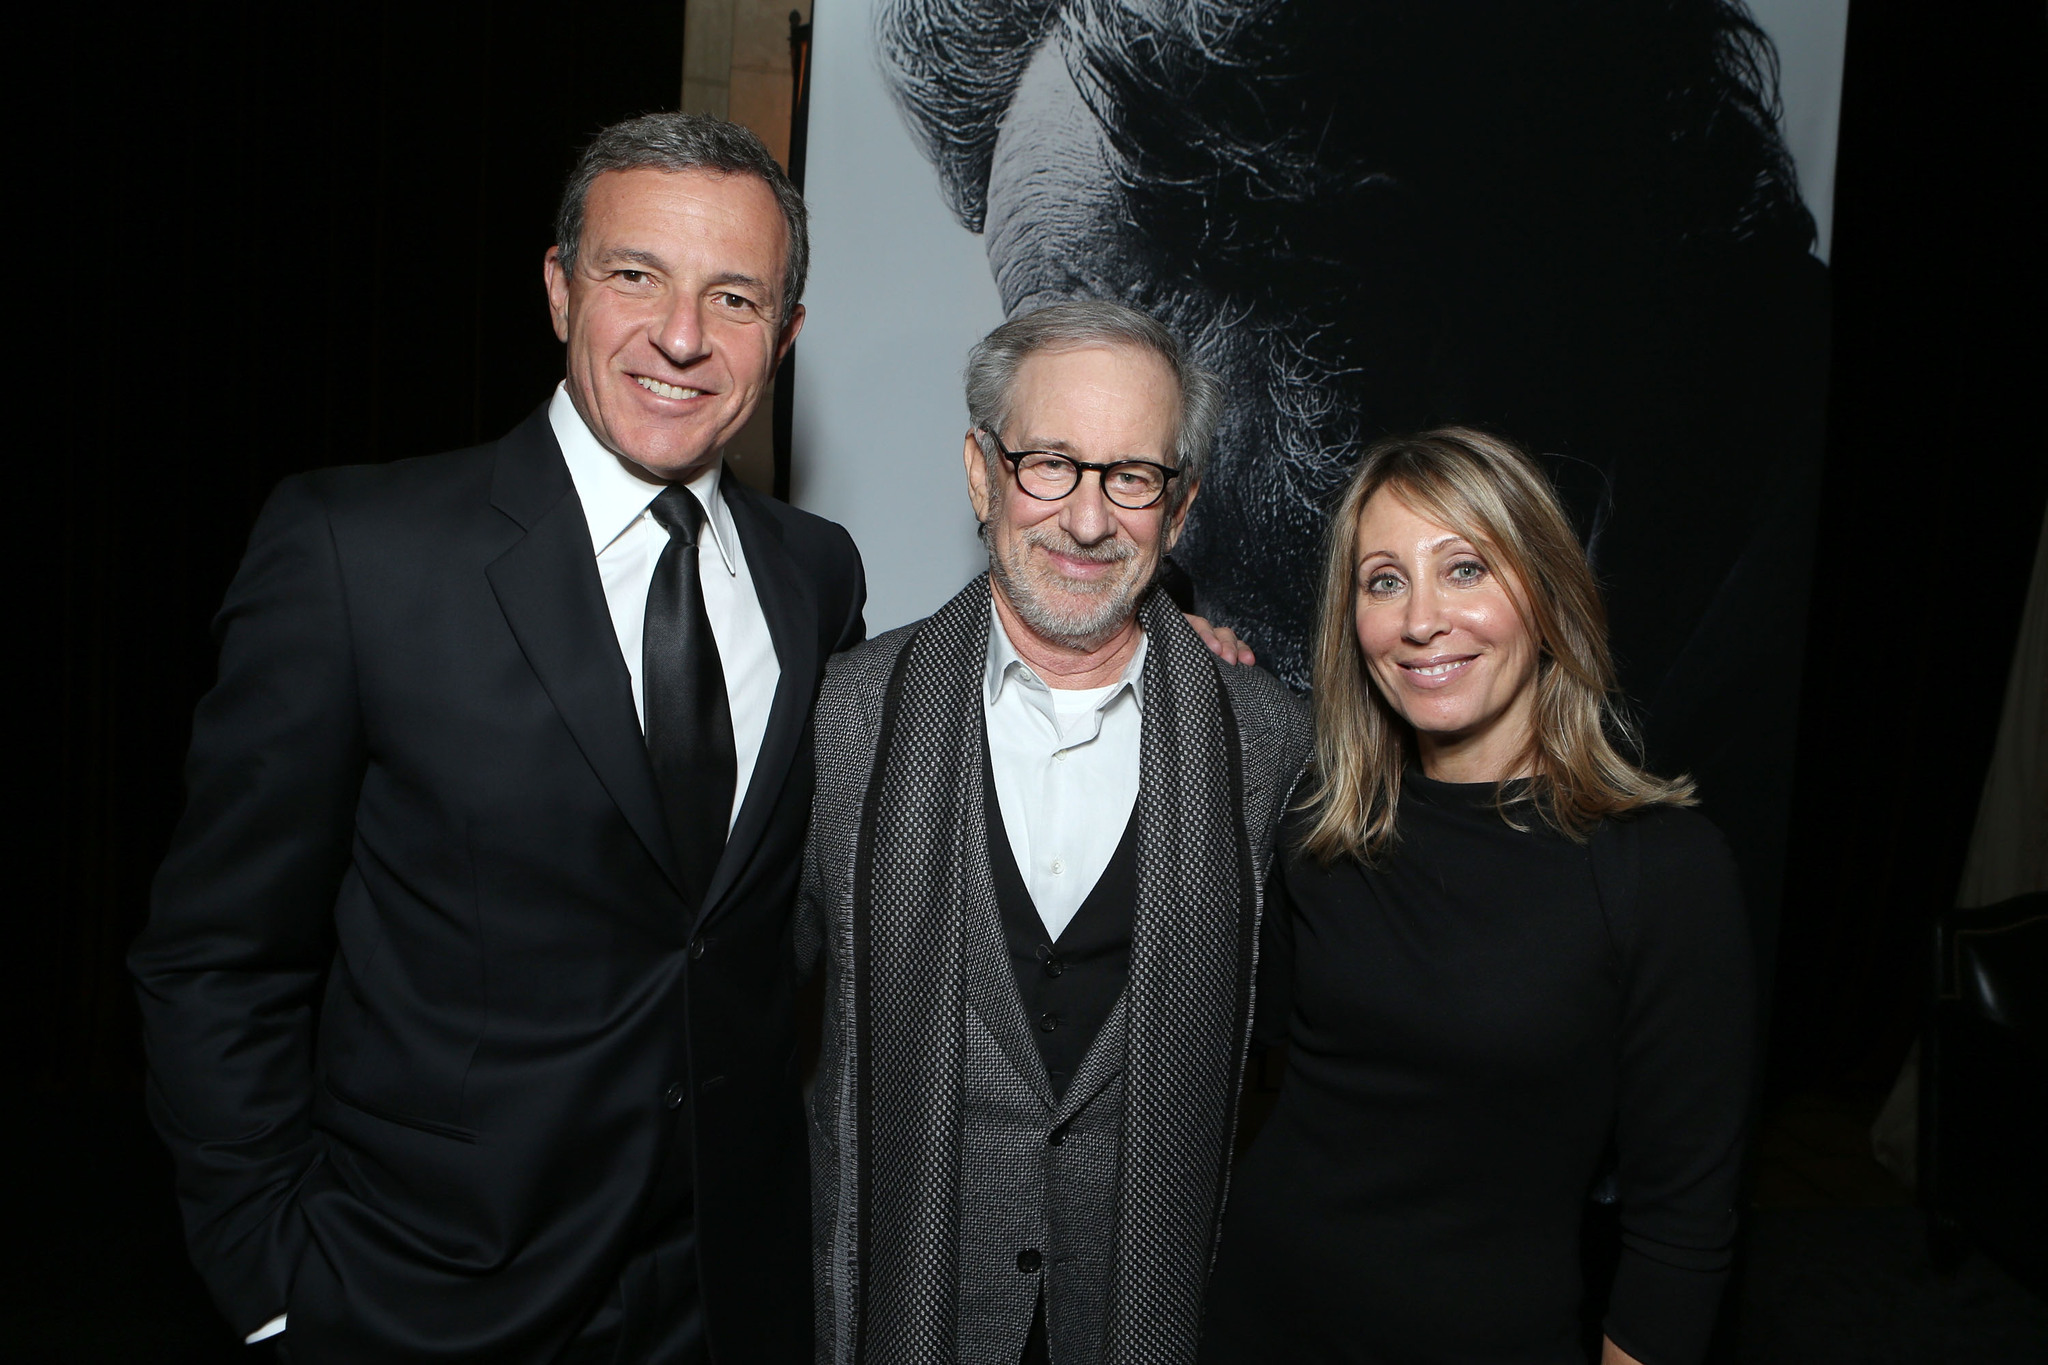 Steven Spielberg, Robert A. Iger and Stacey Snider at event of Linkolnas (2012)